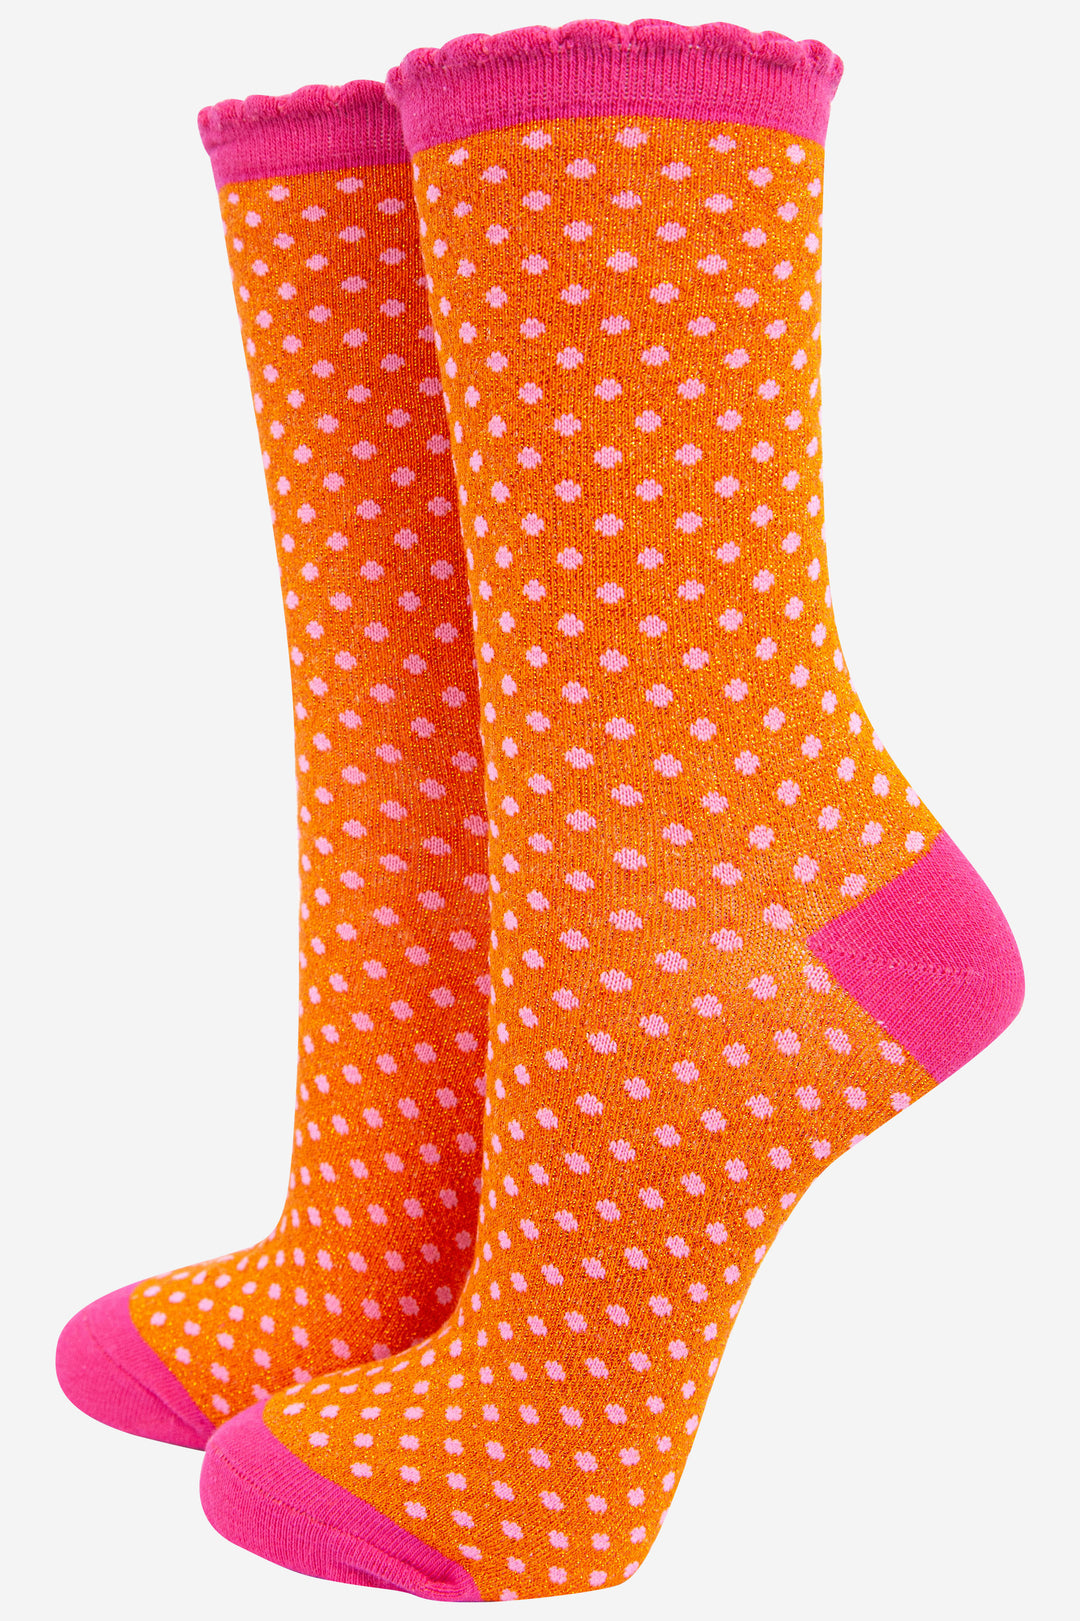 orange ankle socks with pink heel, toe and scalloped top featuring an all over polka dot pattern and sparkly glittery shimmer